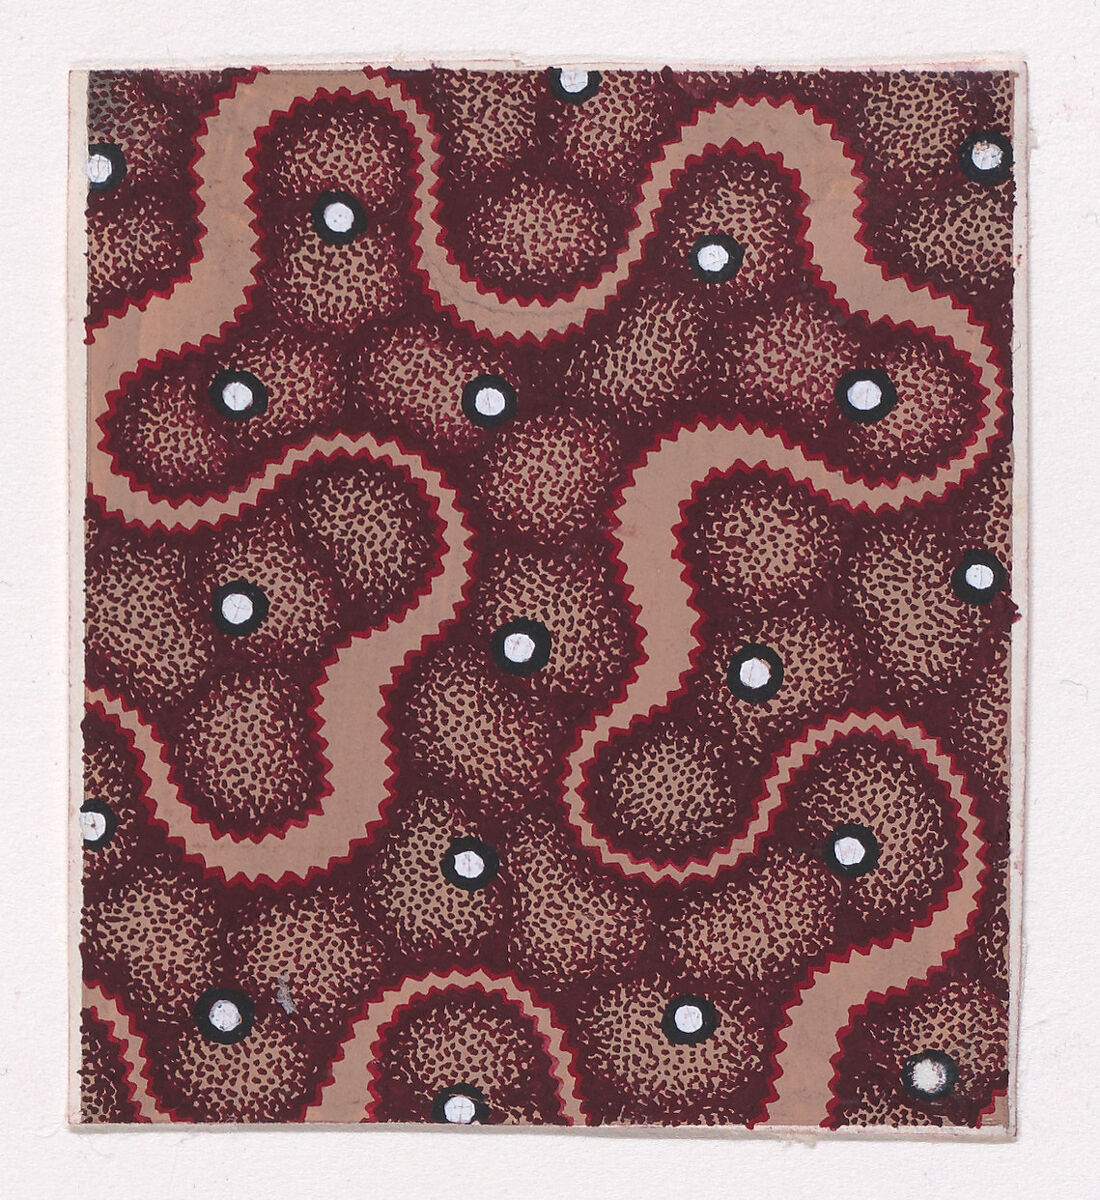 Textile Design with a Ribbon Forming a Vermicular Pattern and Splattered Pearls over an Abstract Honeycomb Pattern, Anonymous, Alsatian, 19th century, Gouache 